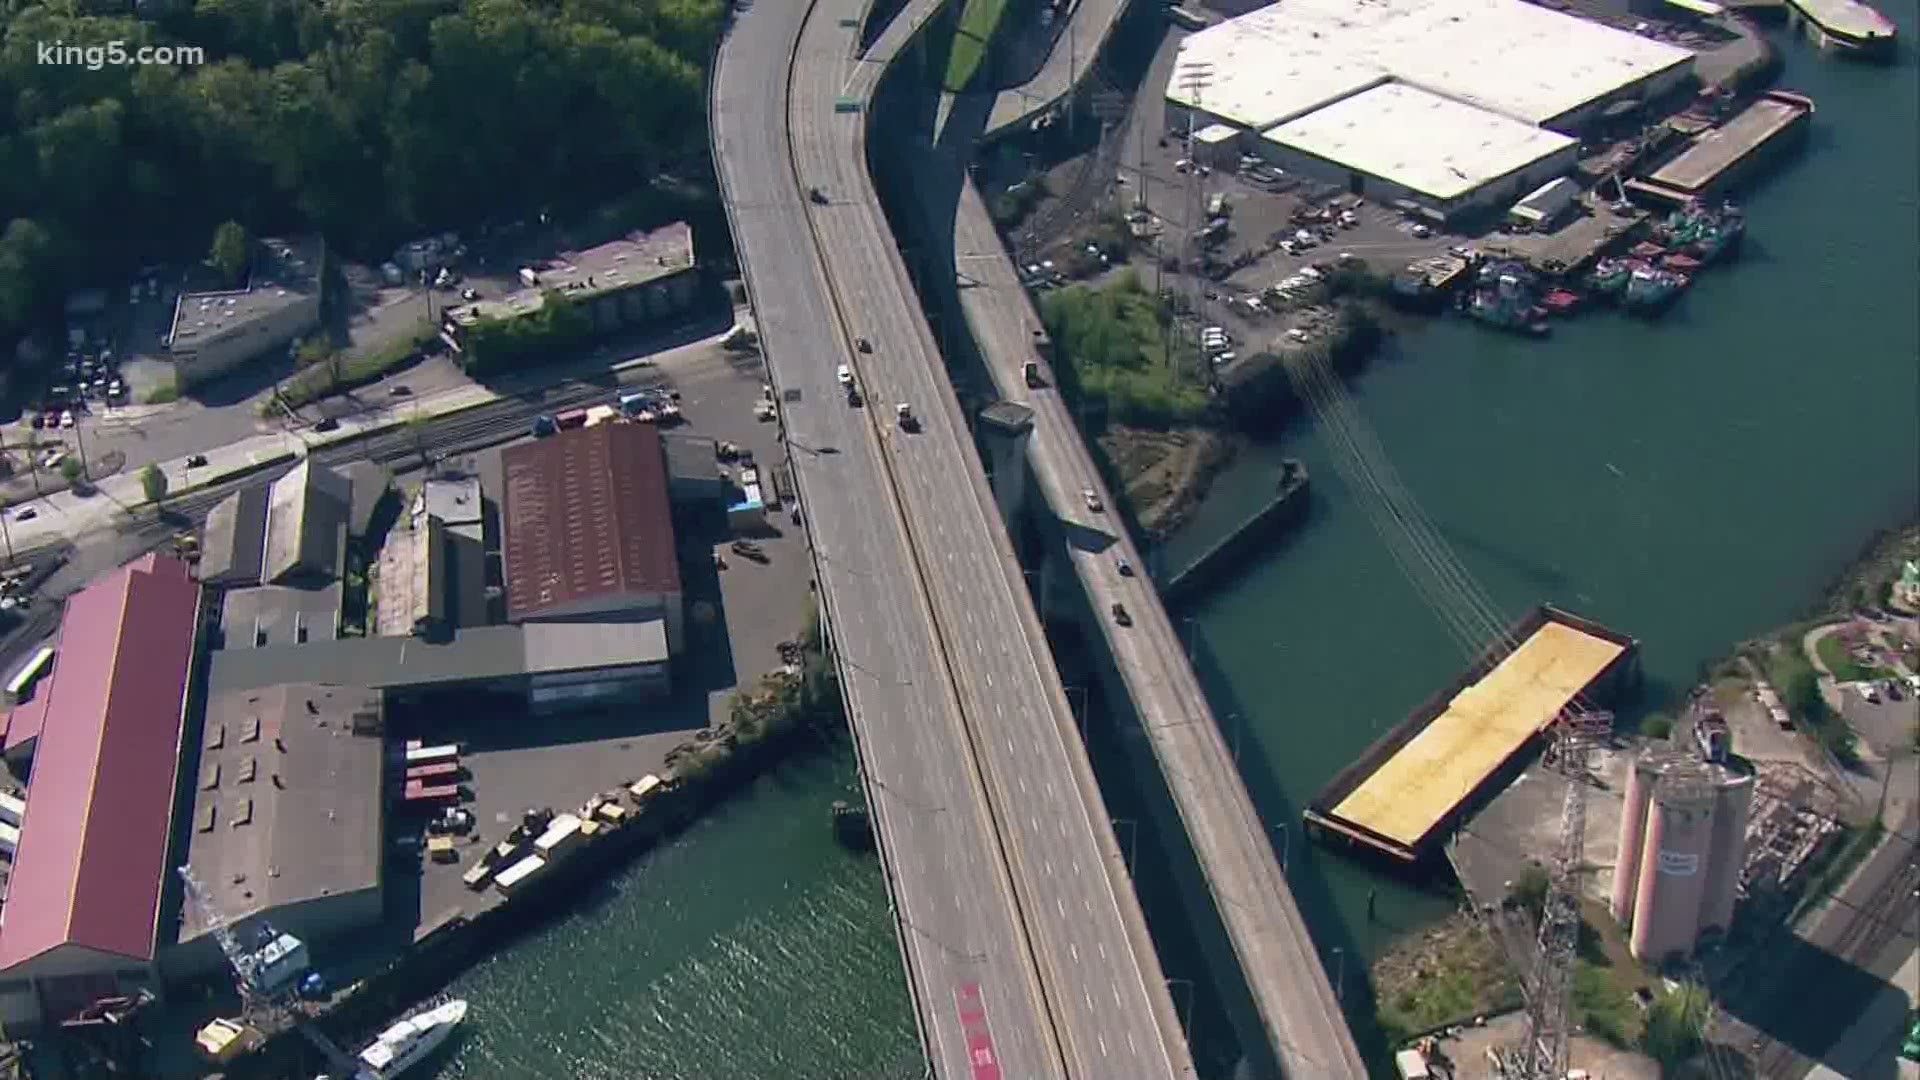 WA state officials acknowledged structural cracks that closed the bridge were known as far back as 2013.